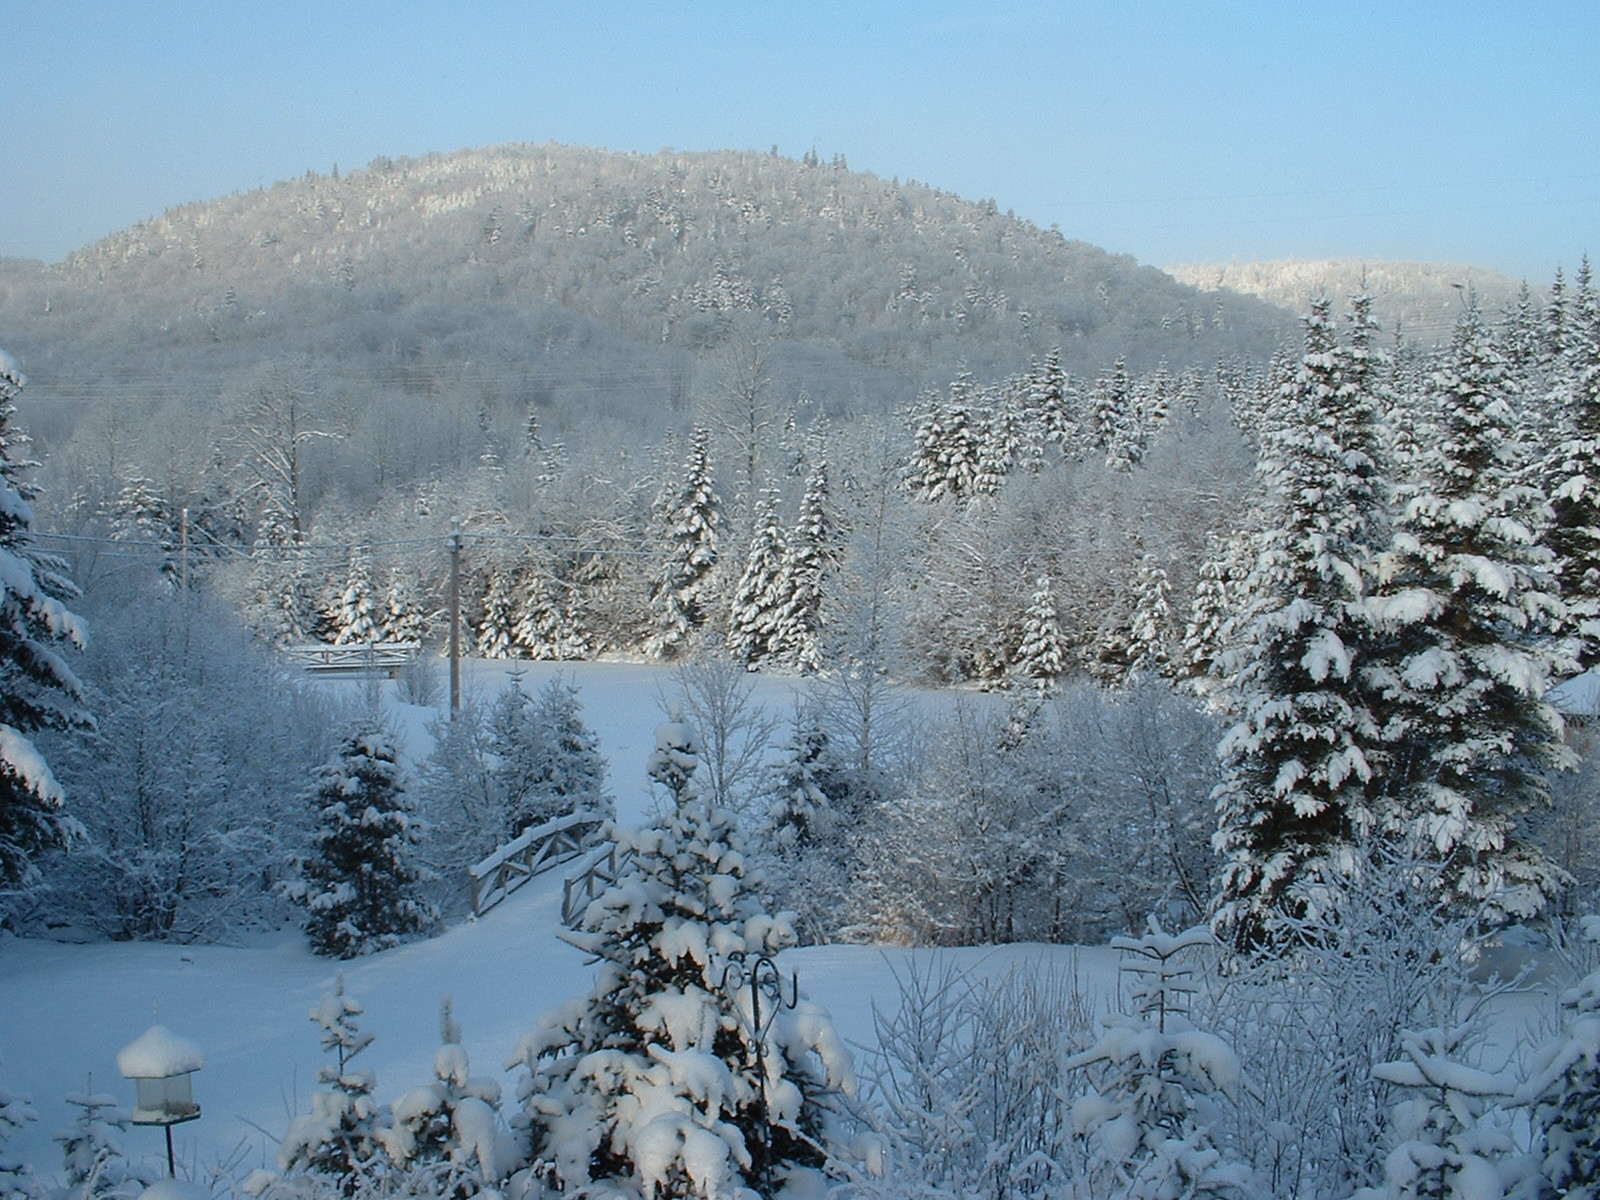 A view of the mountains in winter